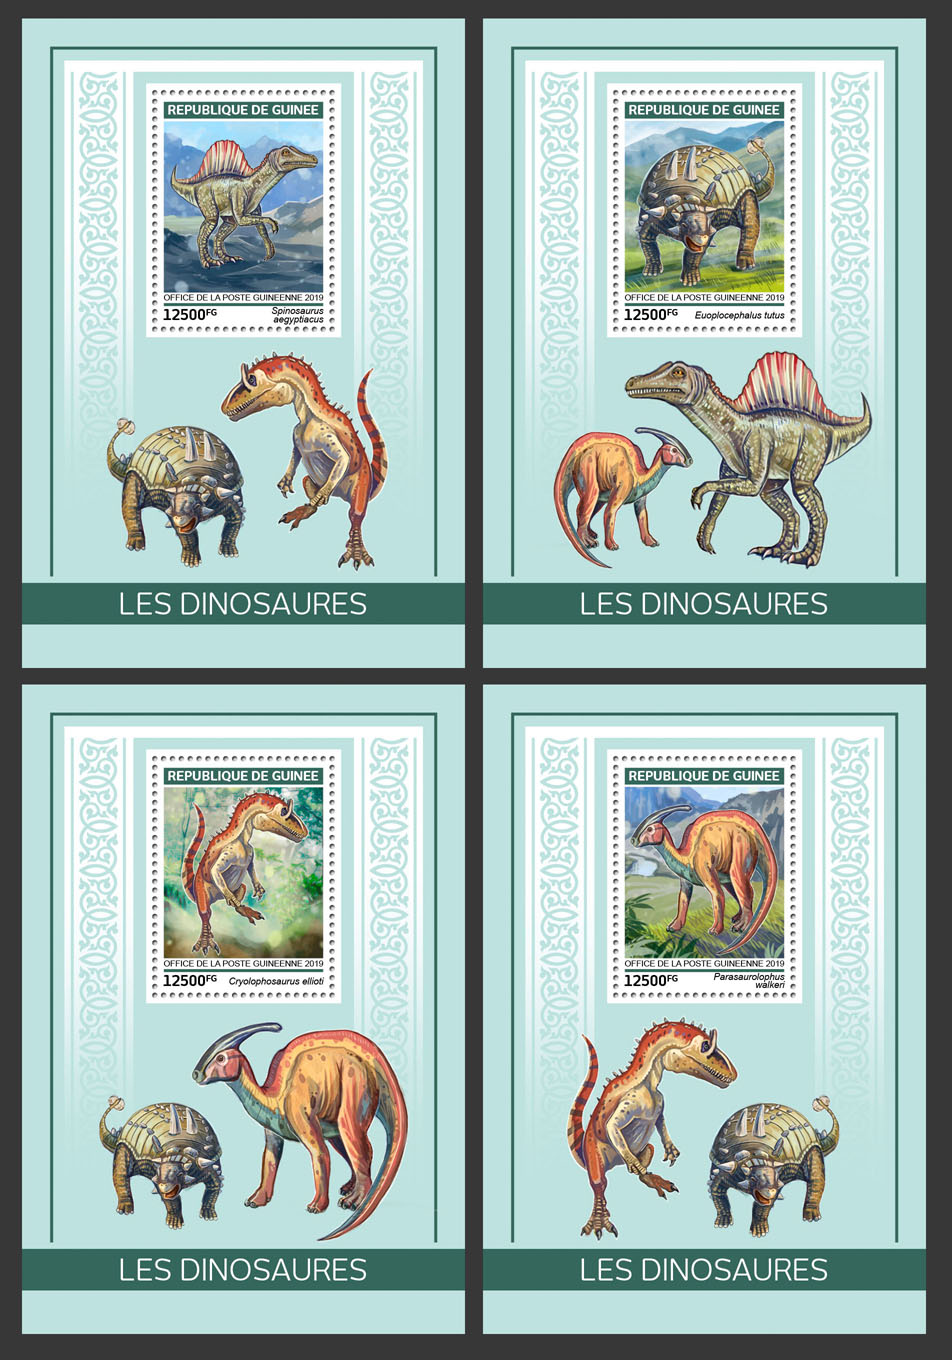 Dinosaurs - Issue of Guinée postage stamps